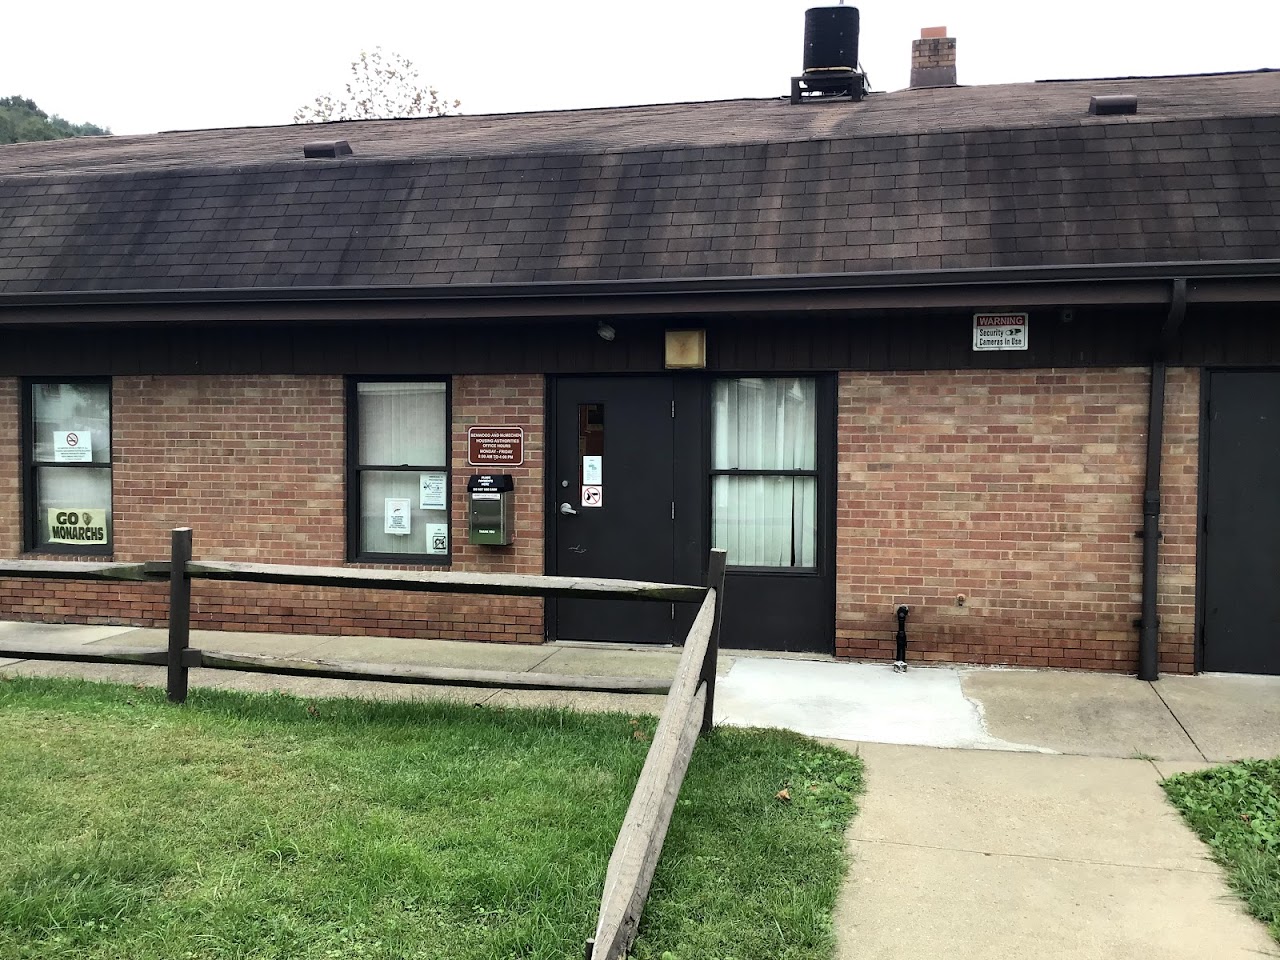 Photo of Housing Authority of Benwood and McMechen. Affordable housing located at 2200 MARSHALL Street S BENWOOD, WV 26031